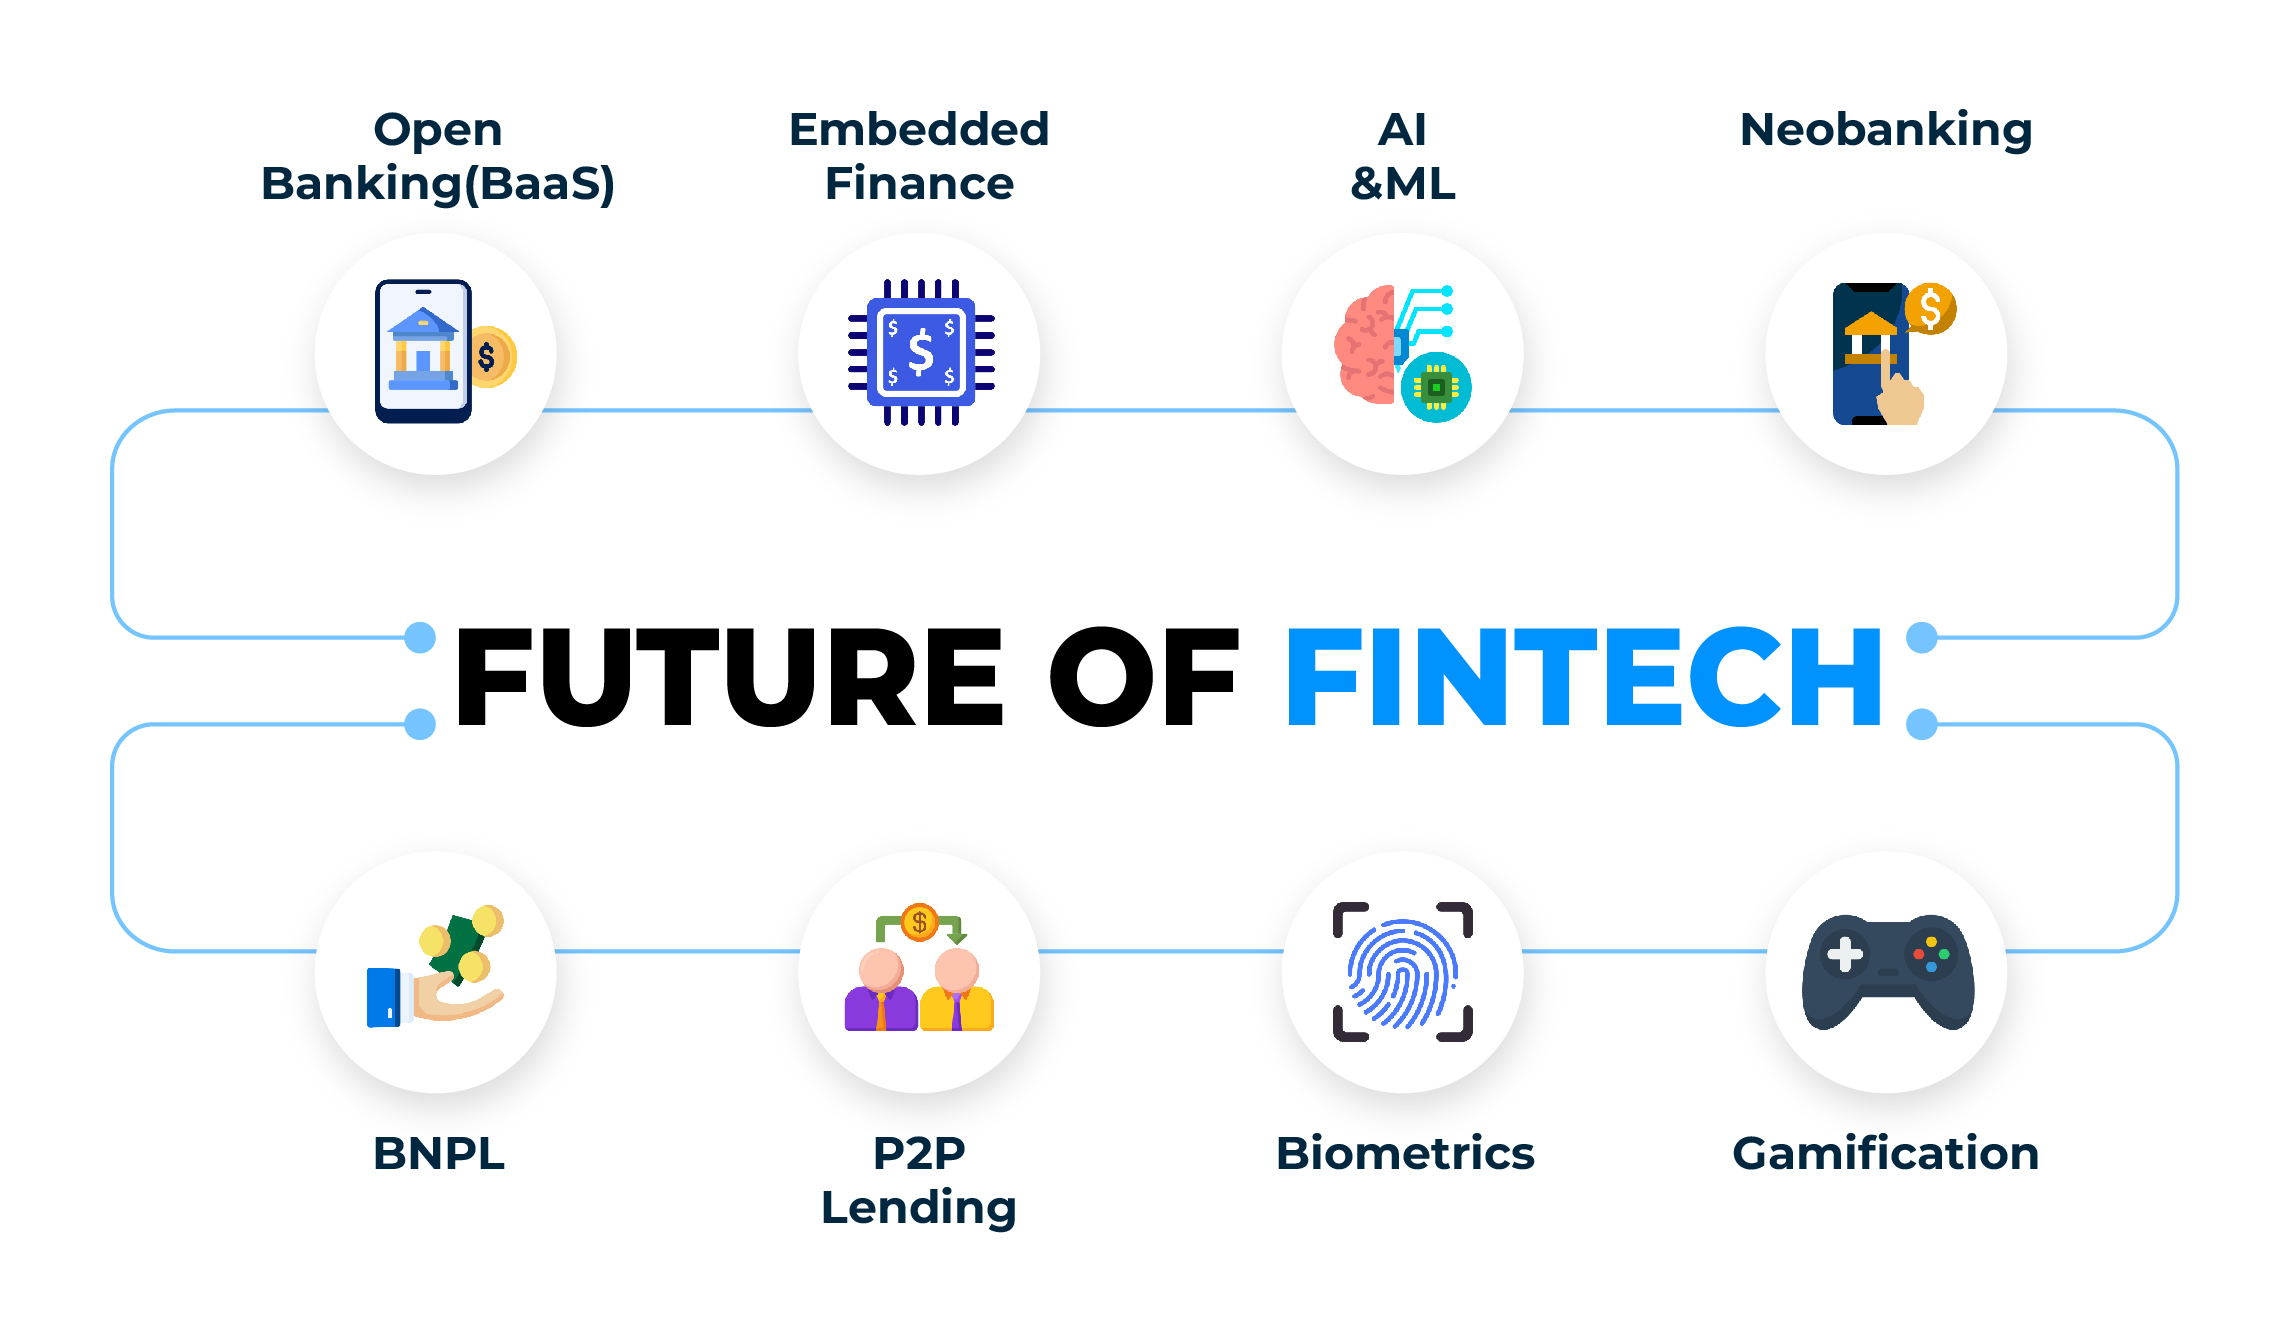 What is the future of fintech